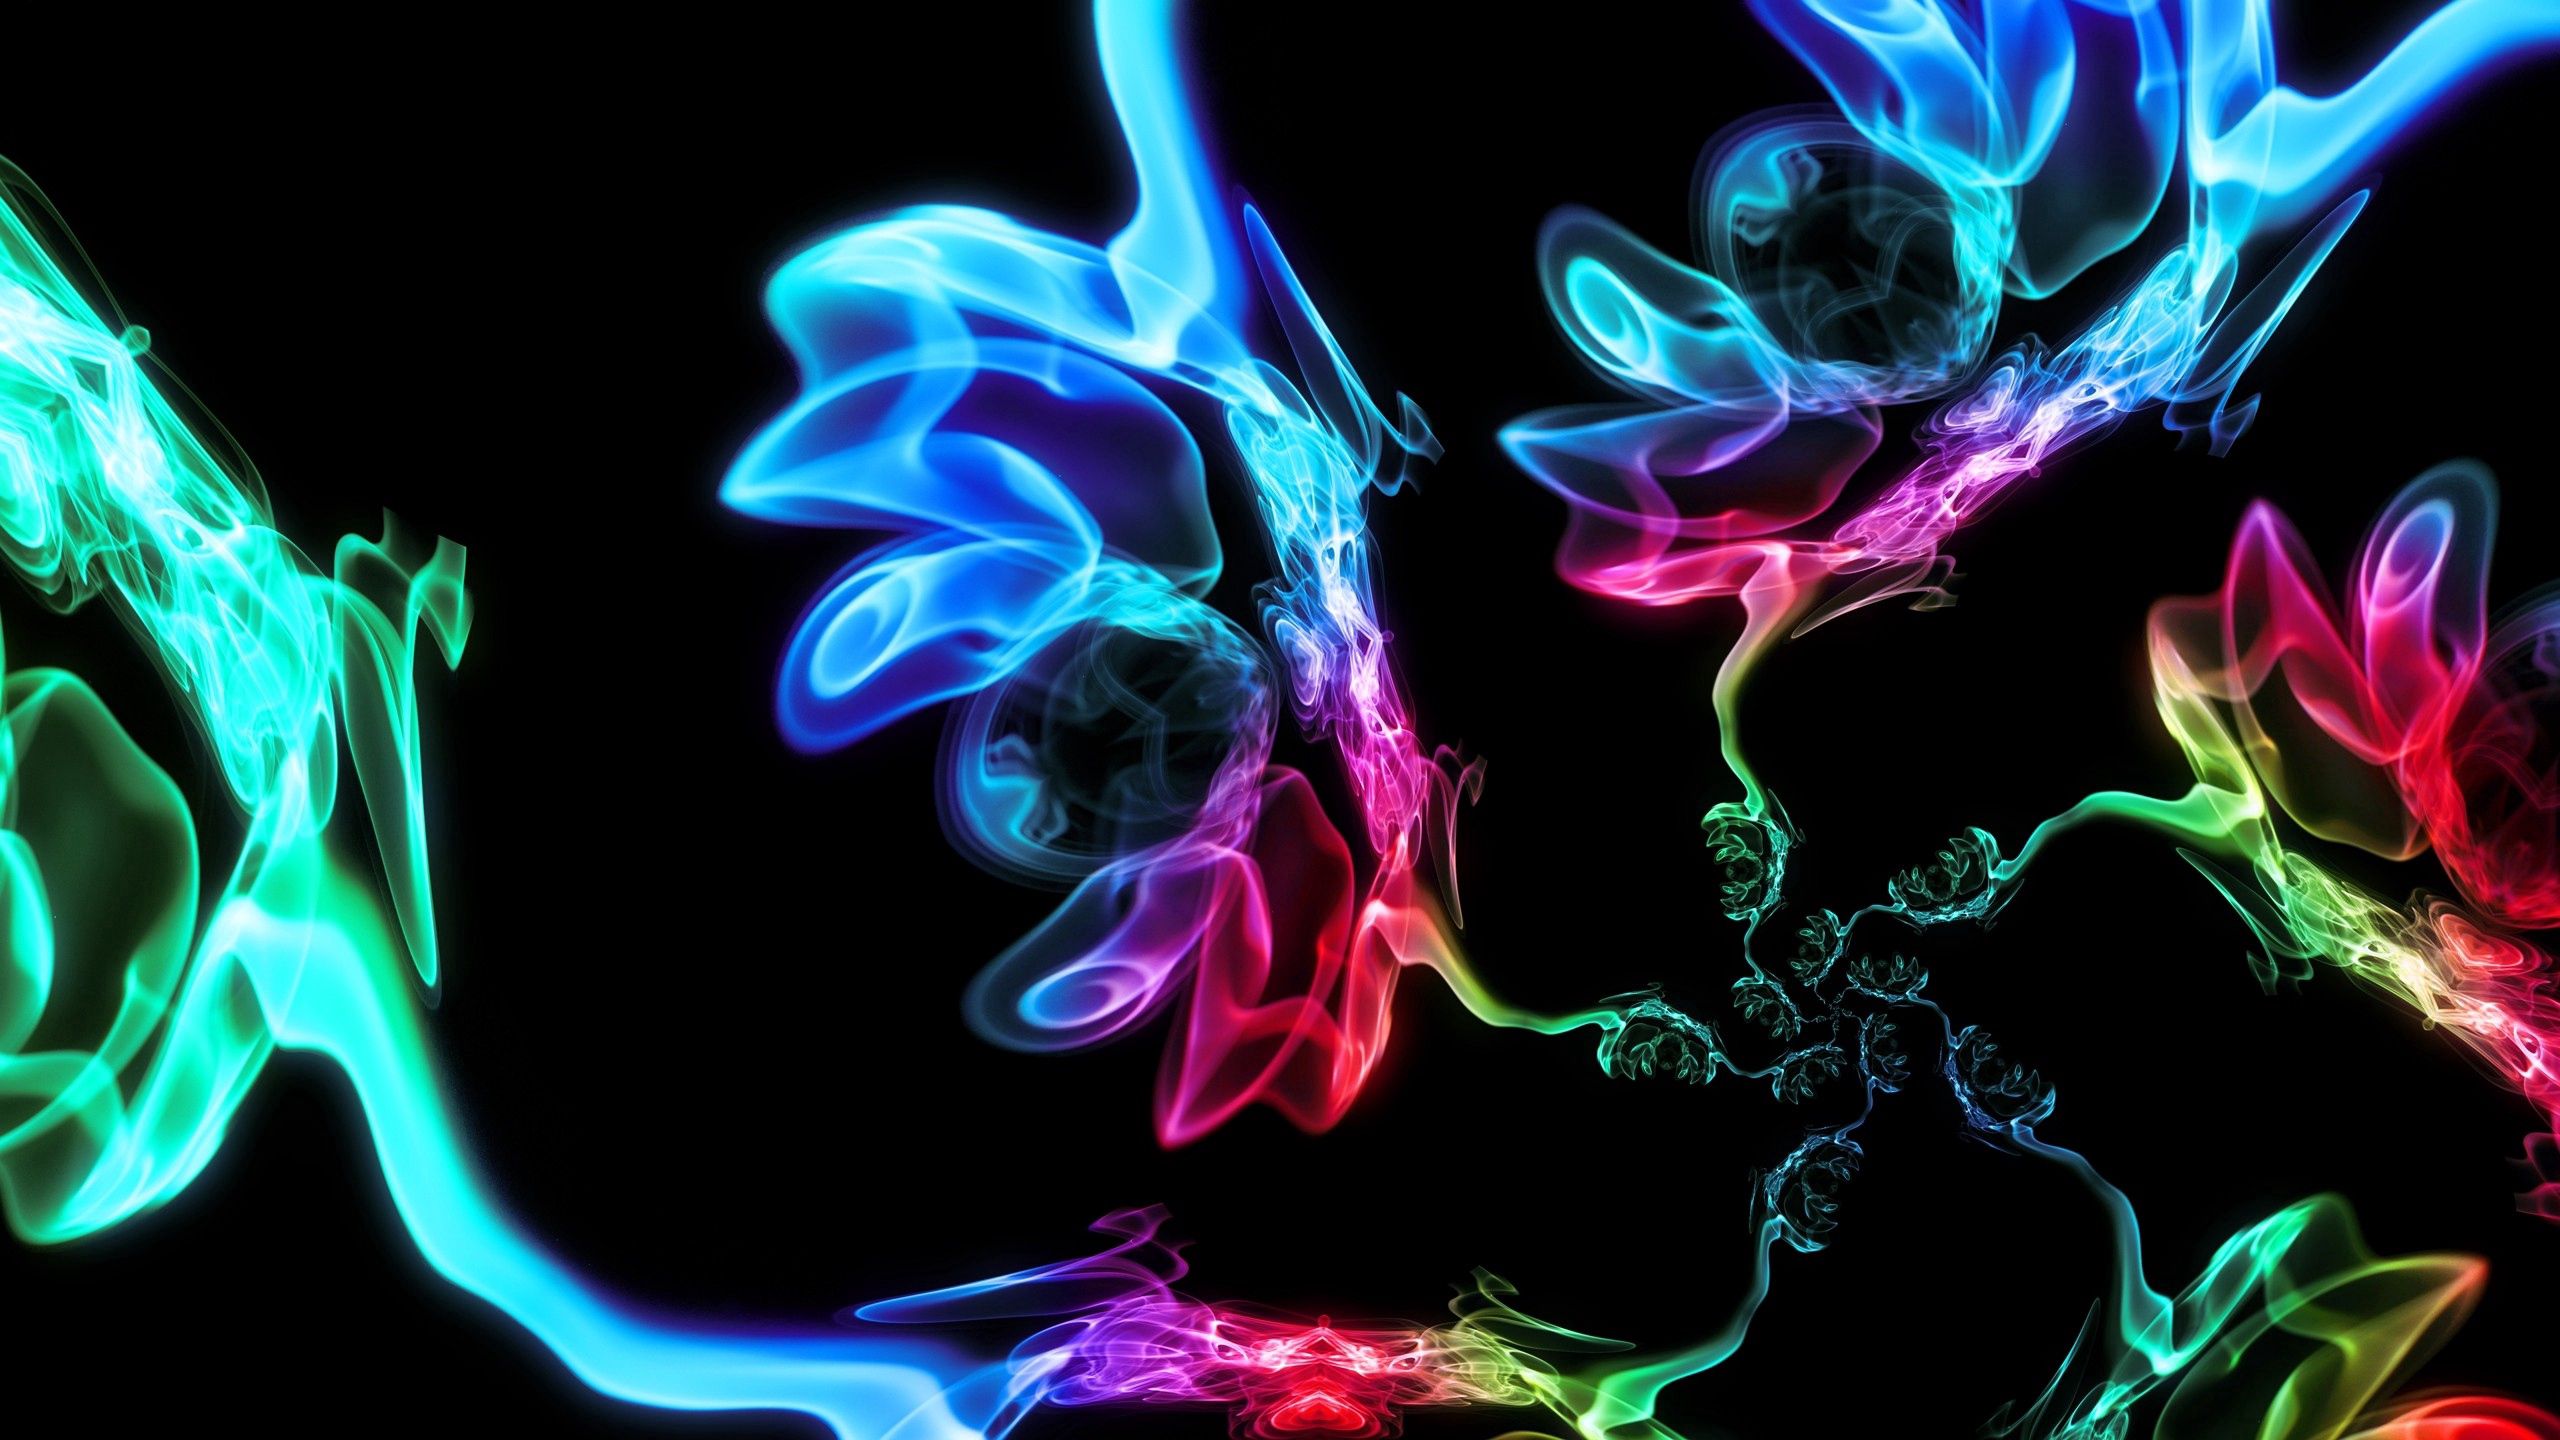 forms, motley, abstract, smoke, multicolored, dark background, form 4K